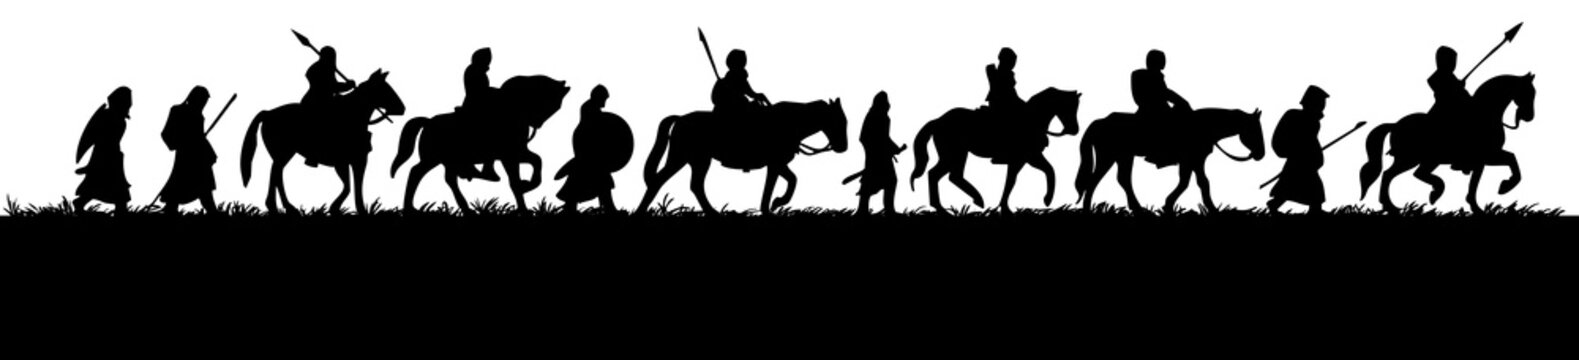 silhouette of group of medieval warriors on the expedition, black illustration, isolated